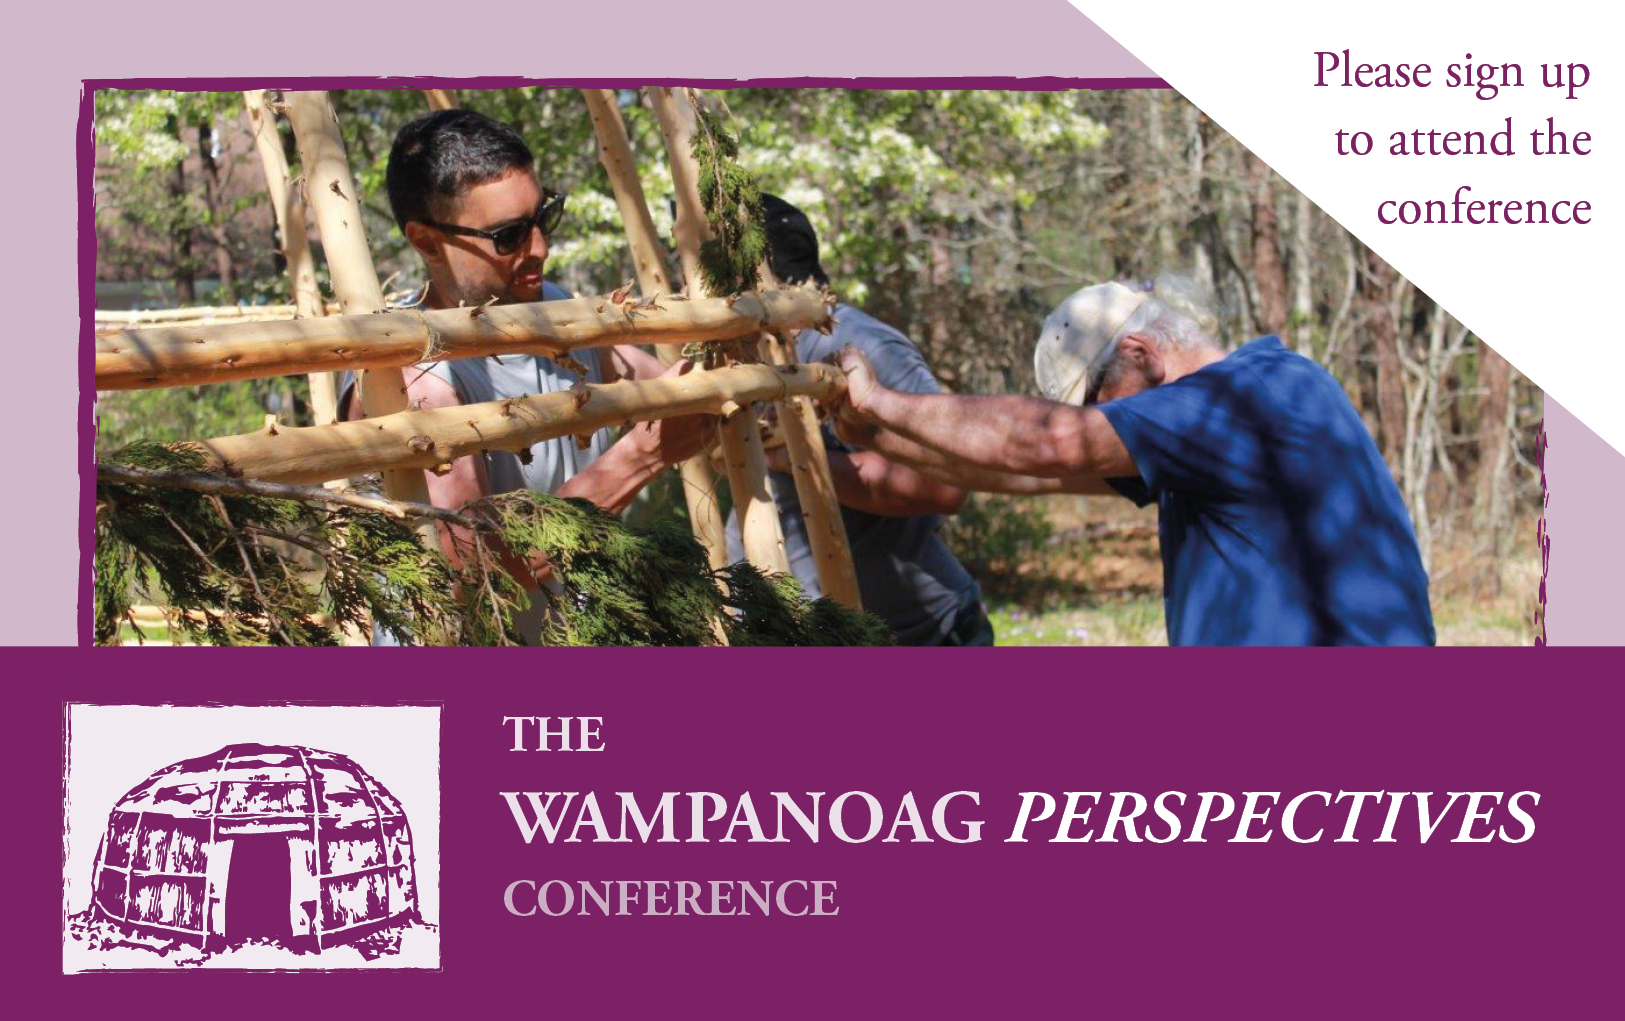 Wampanoag Perspective Conference explores Acceptance, Migration & Freedom